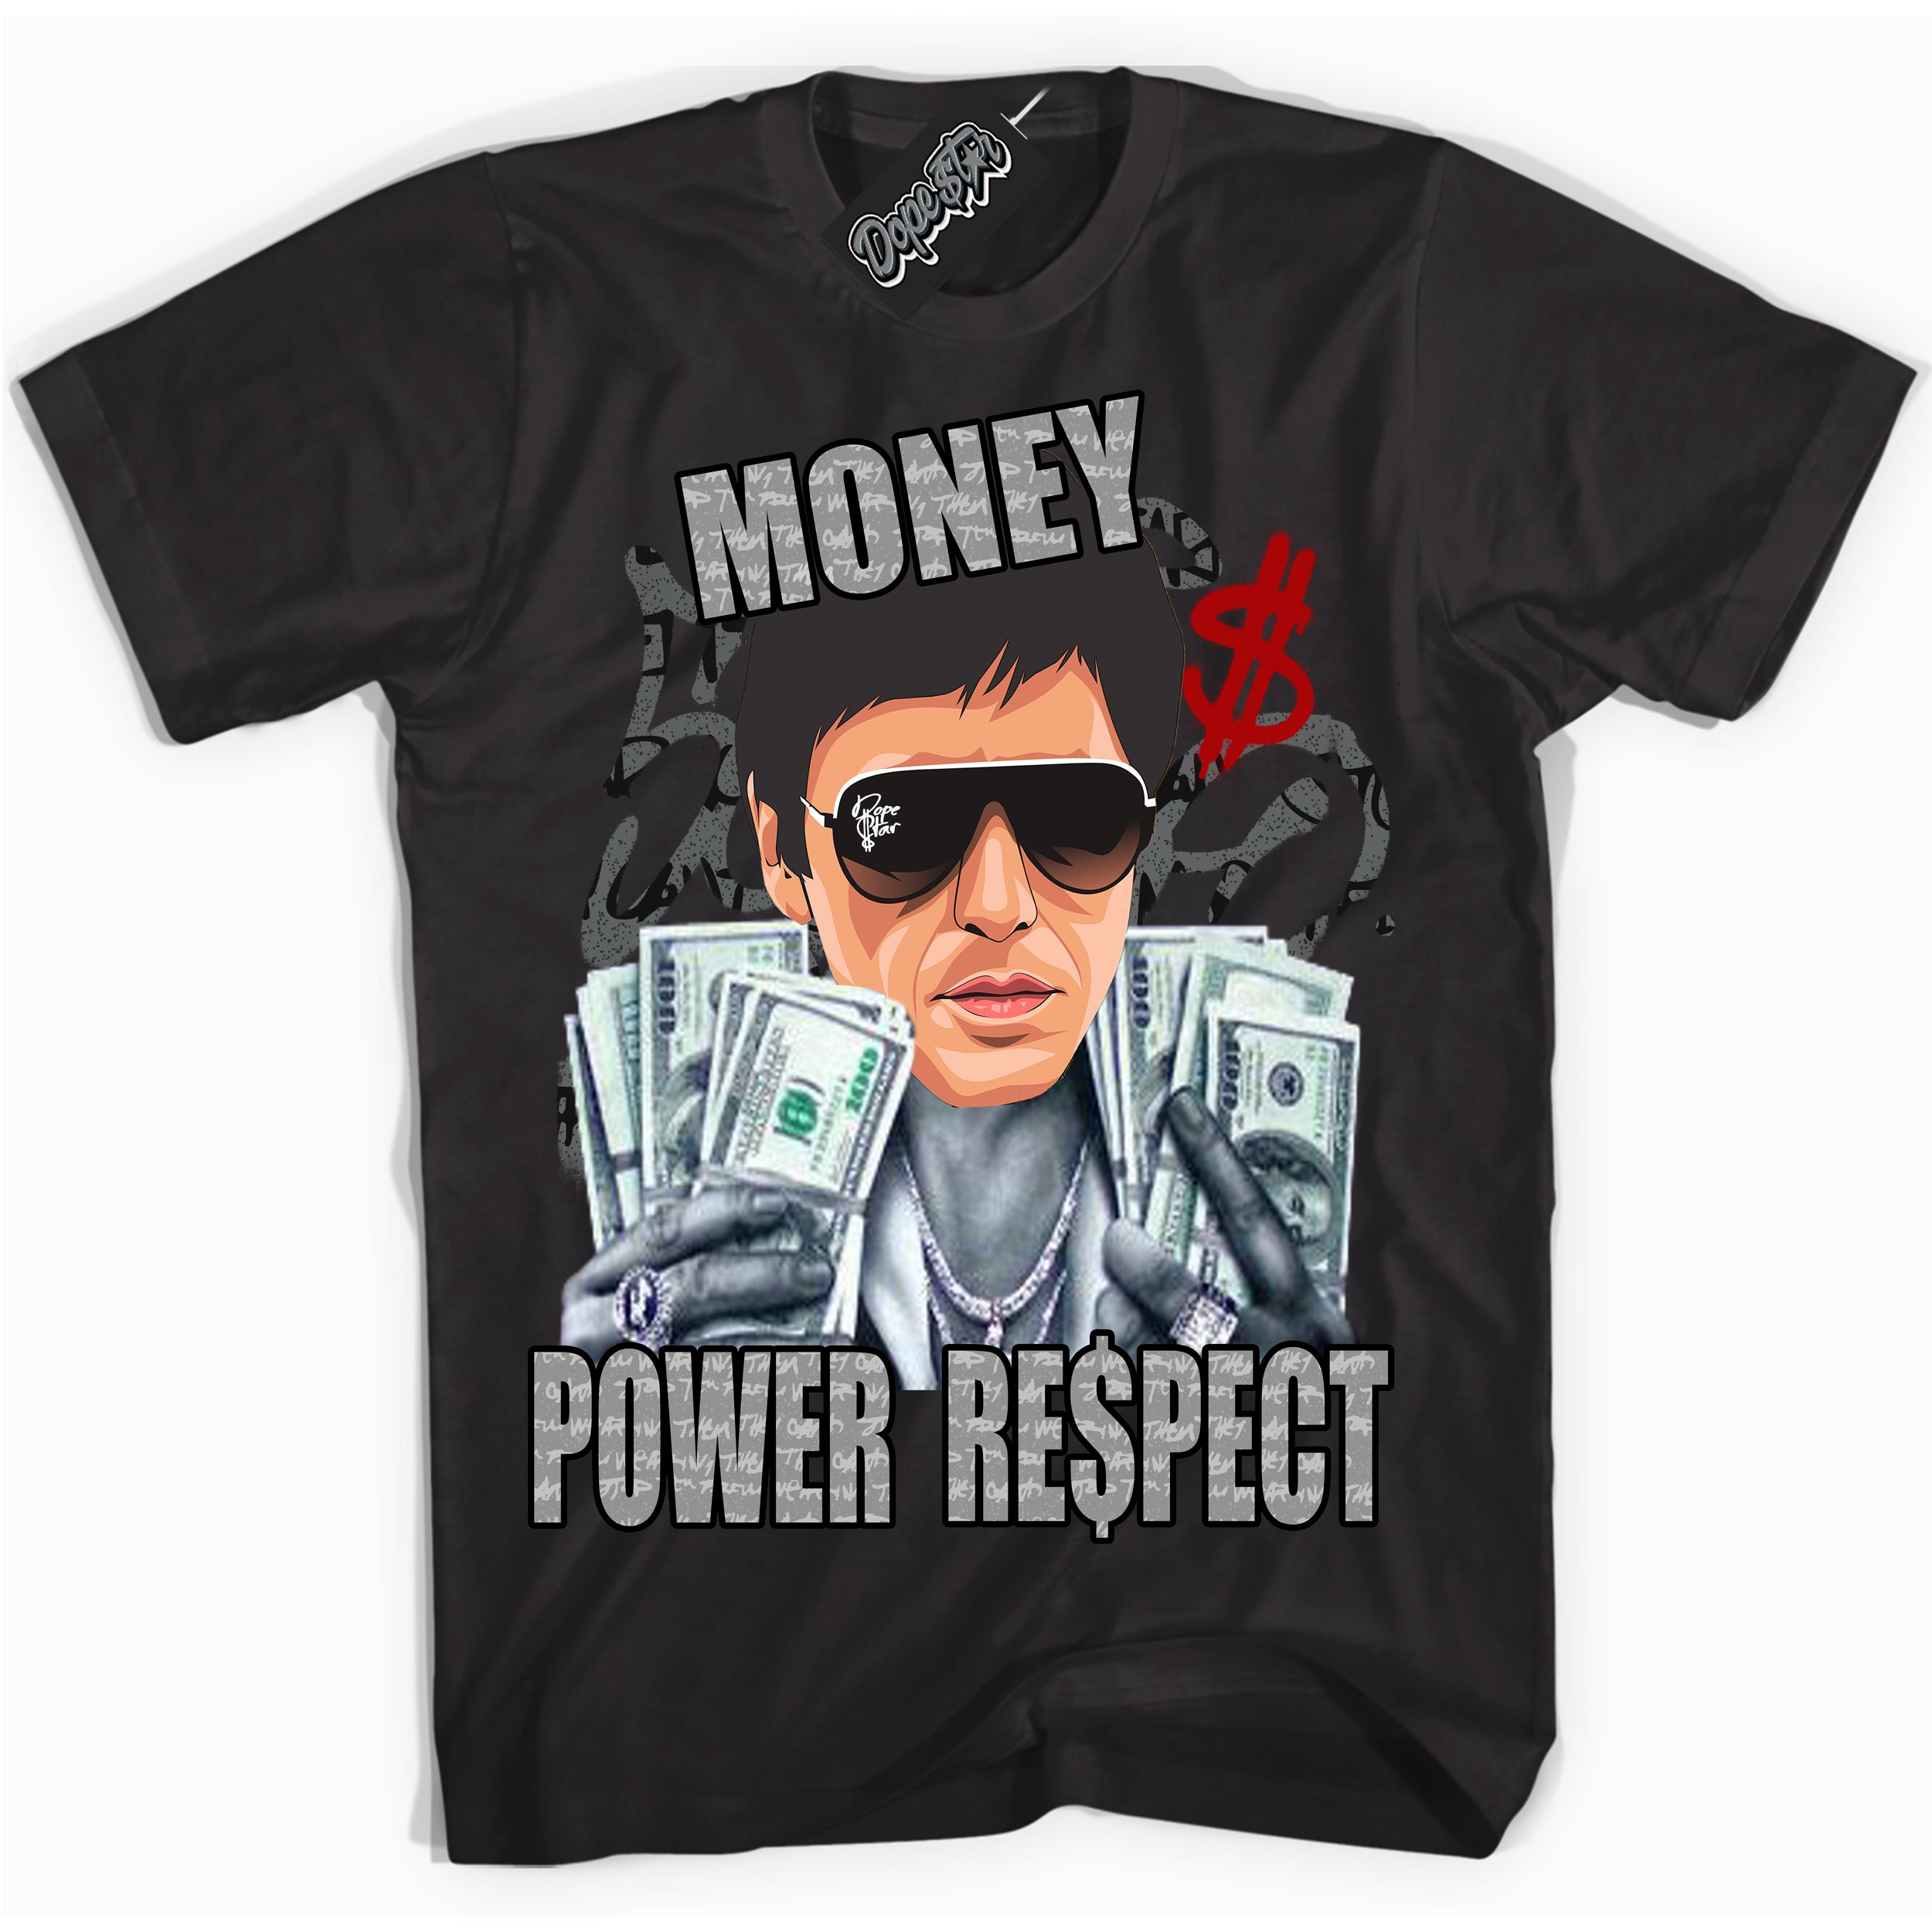 Cool Black Shirt with “ Tony Montana ” design that perfectly matches Rebellionaire 1s Sneakers.